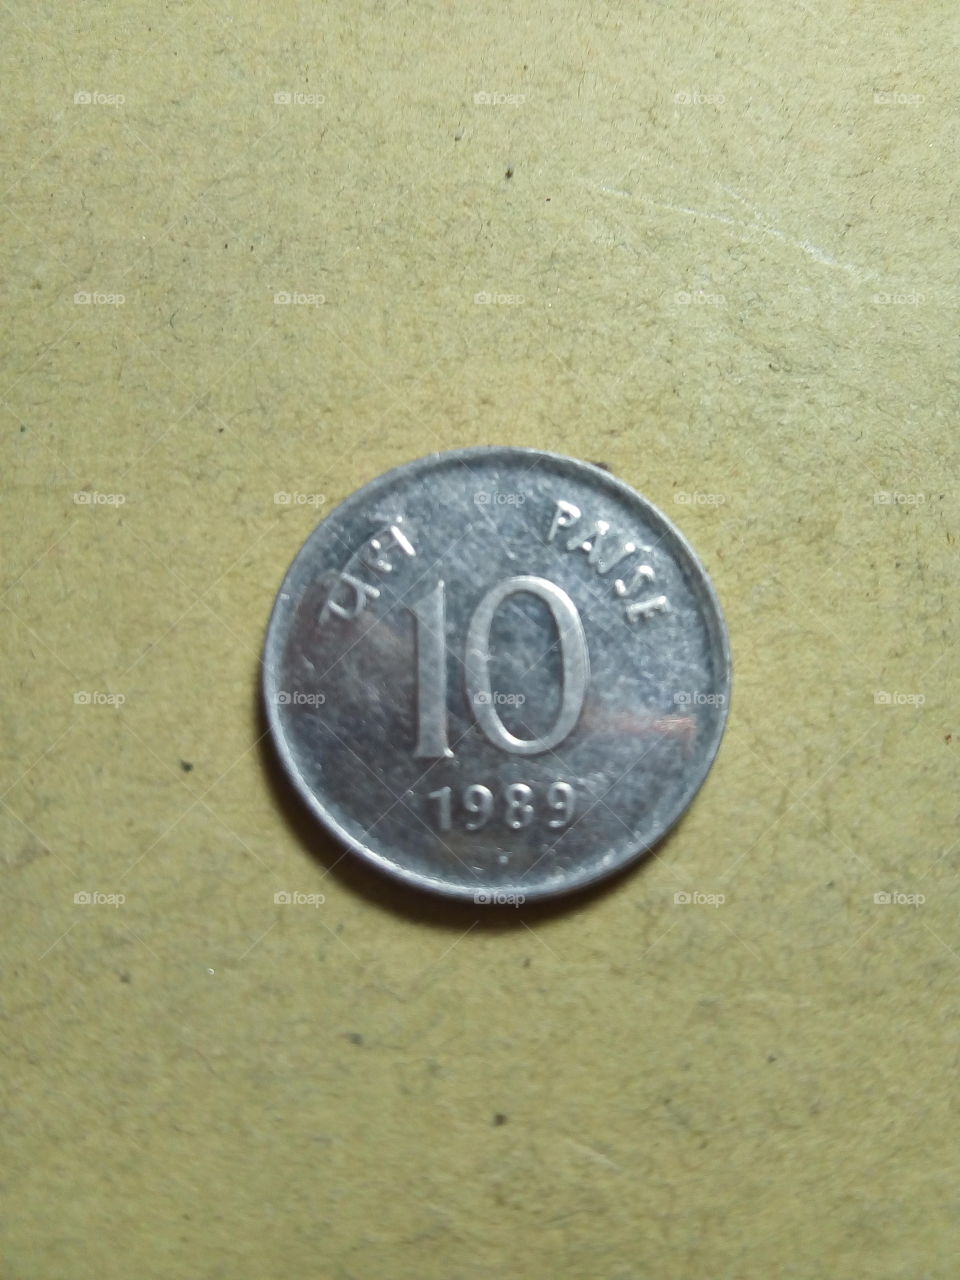 Ten paise- 1/10 share of Indian Rupee issued by Government of India in 1989.